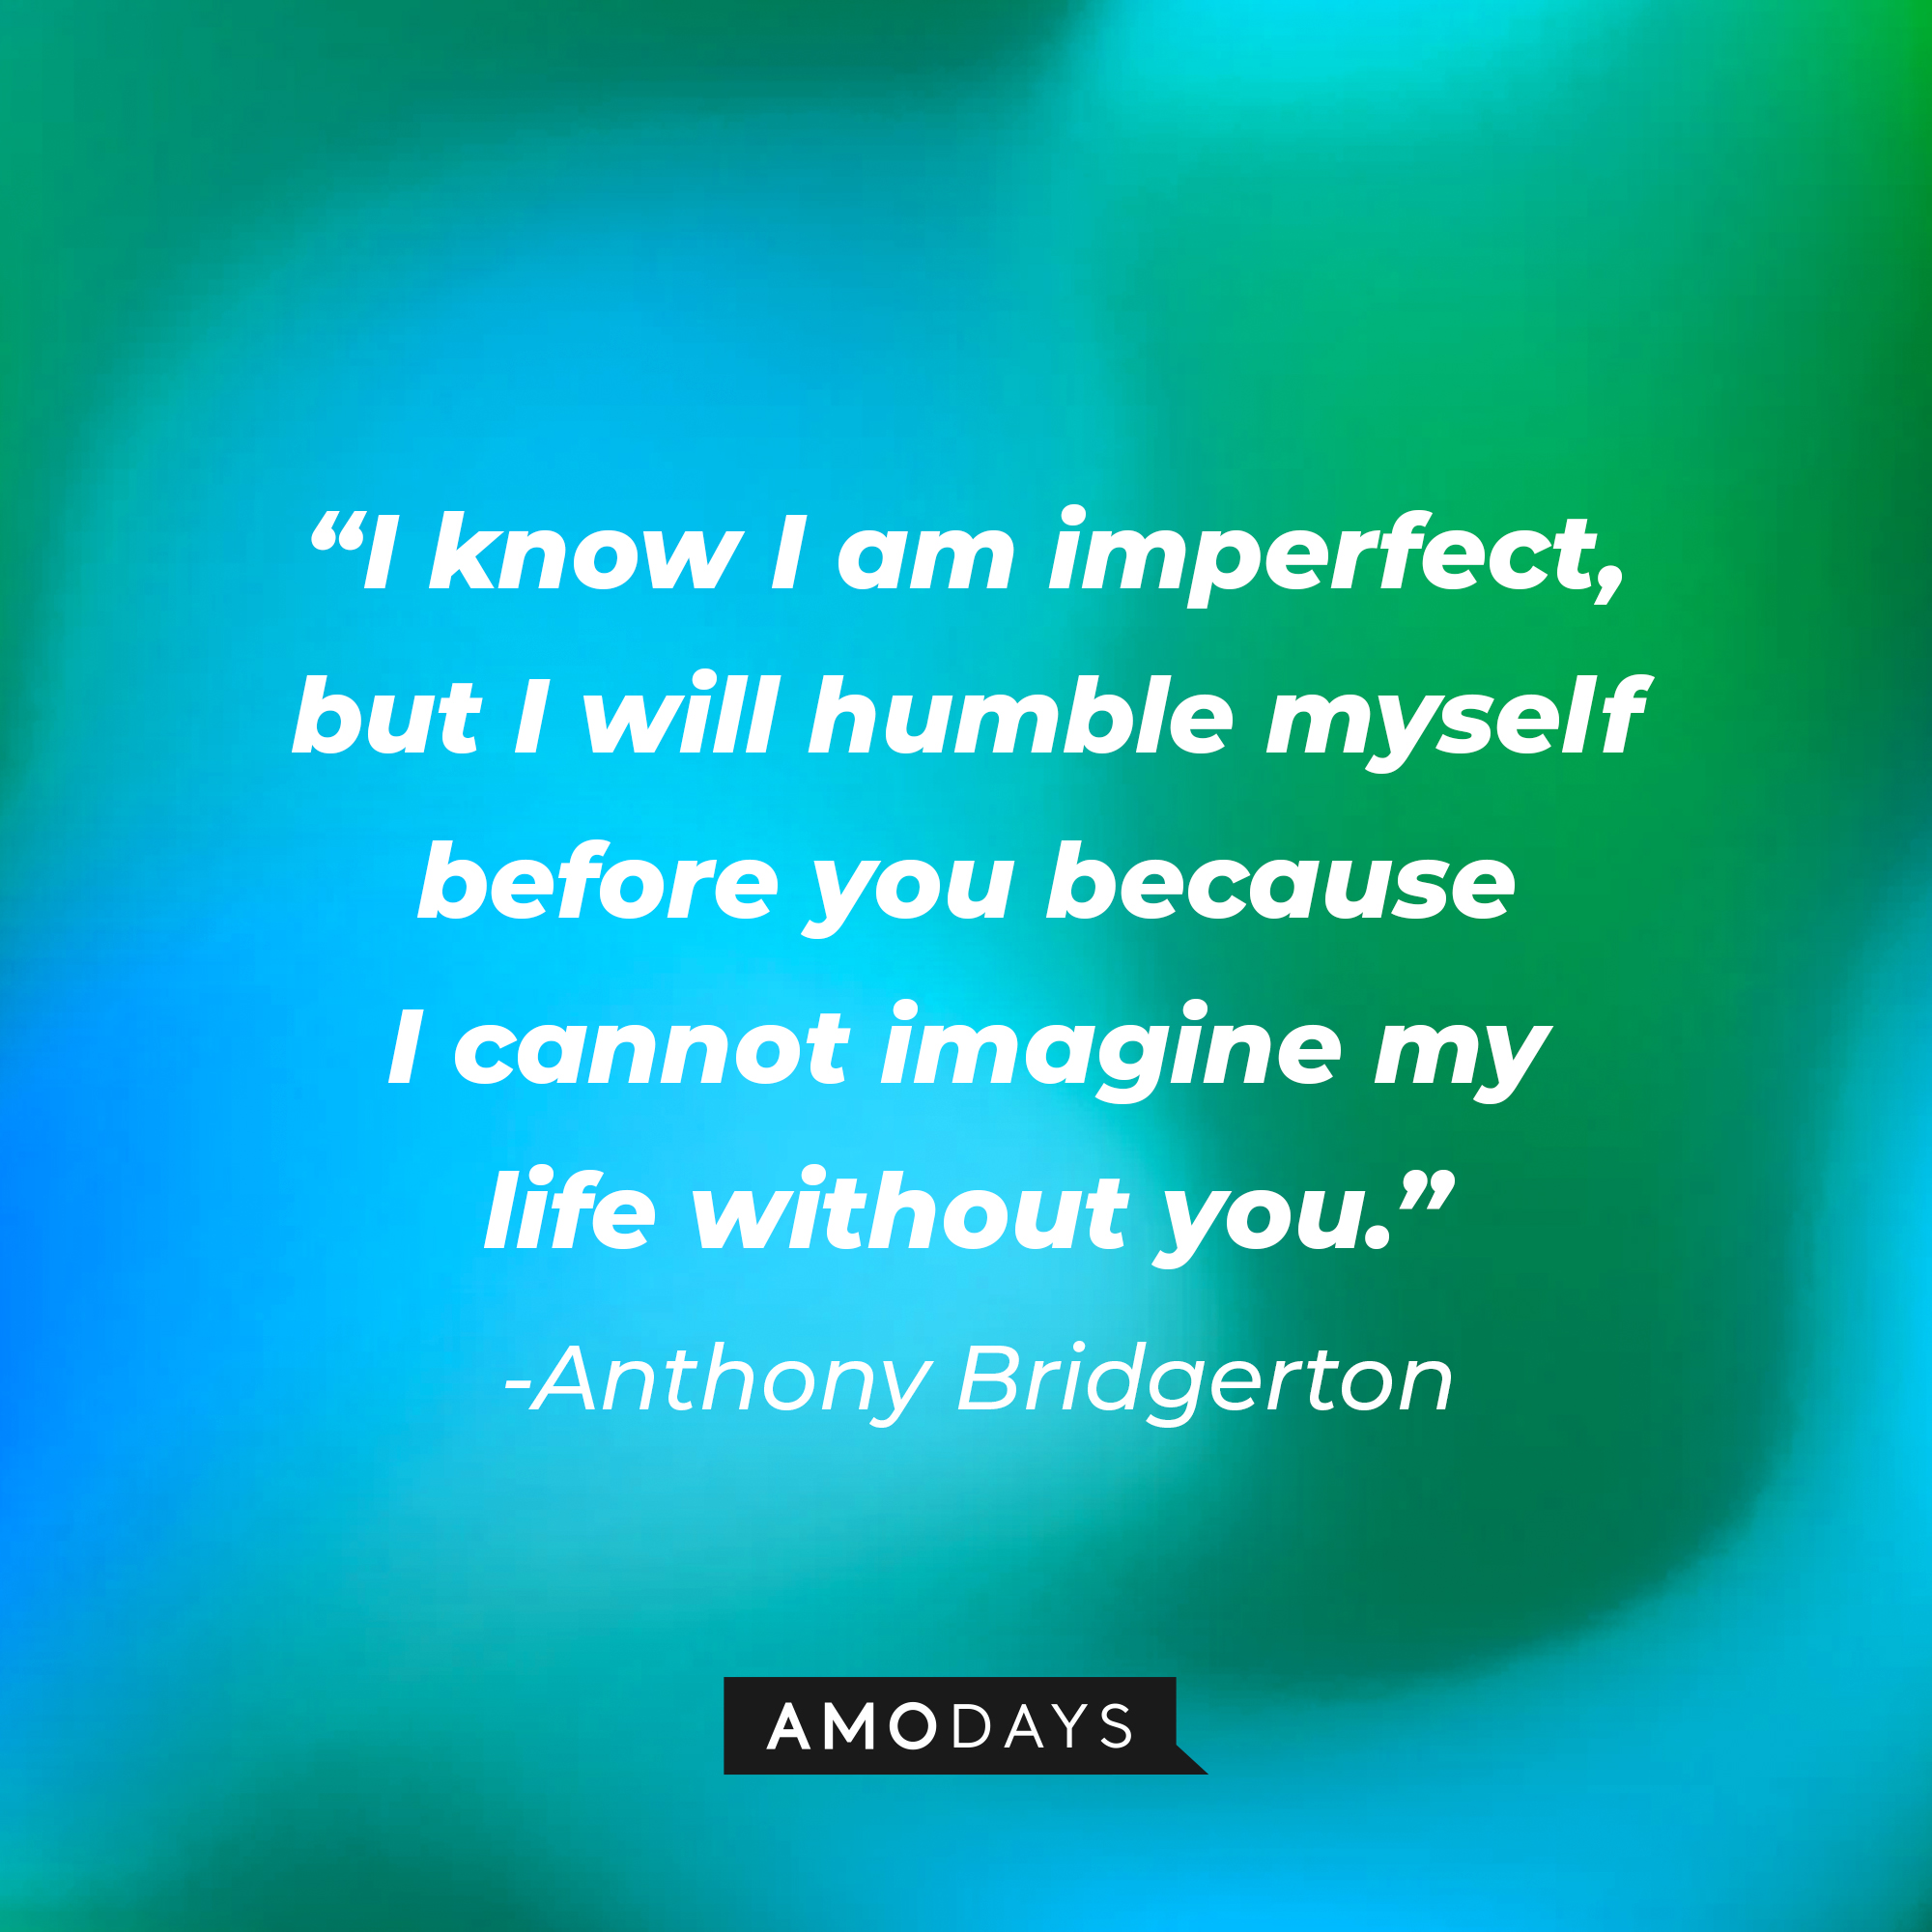 Anthony Bridgerton's quote: "I know I am imperfect, but I will humble myself before you because I cannot imagine my life without you." | Source: AmoDays